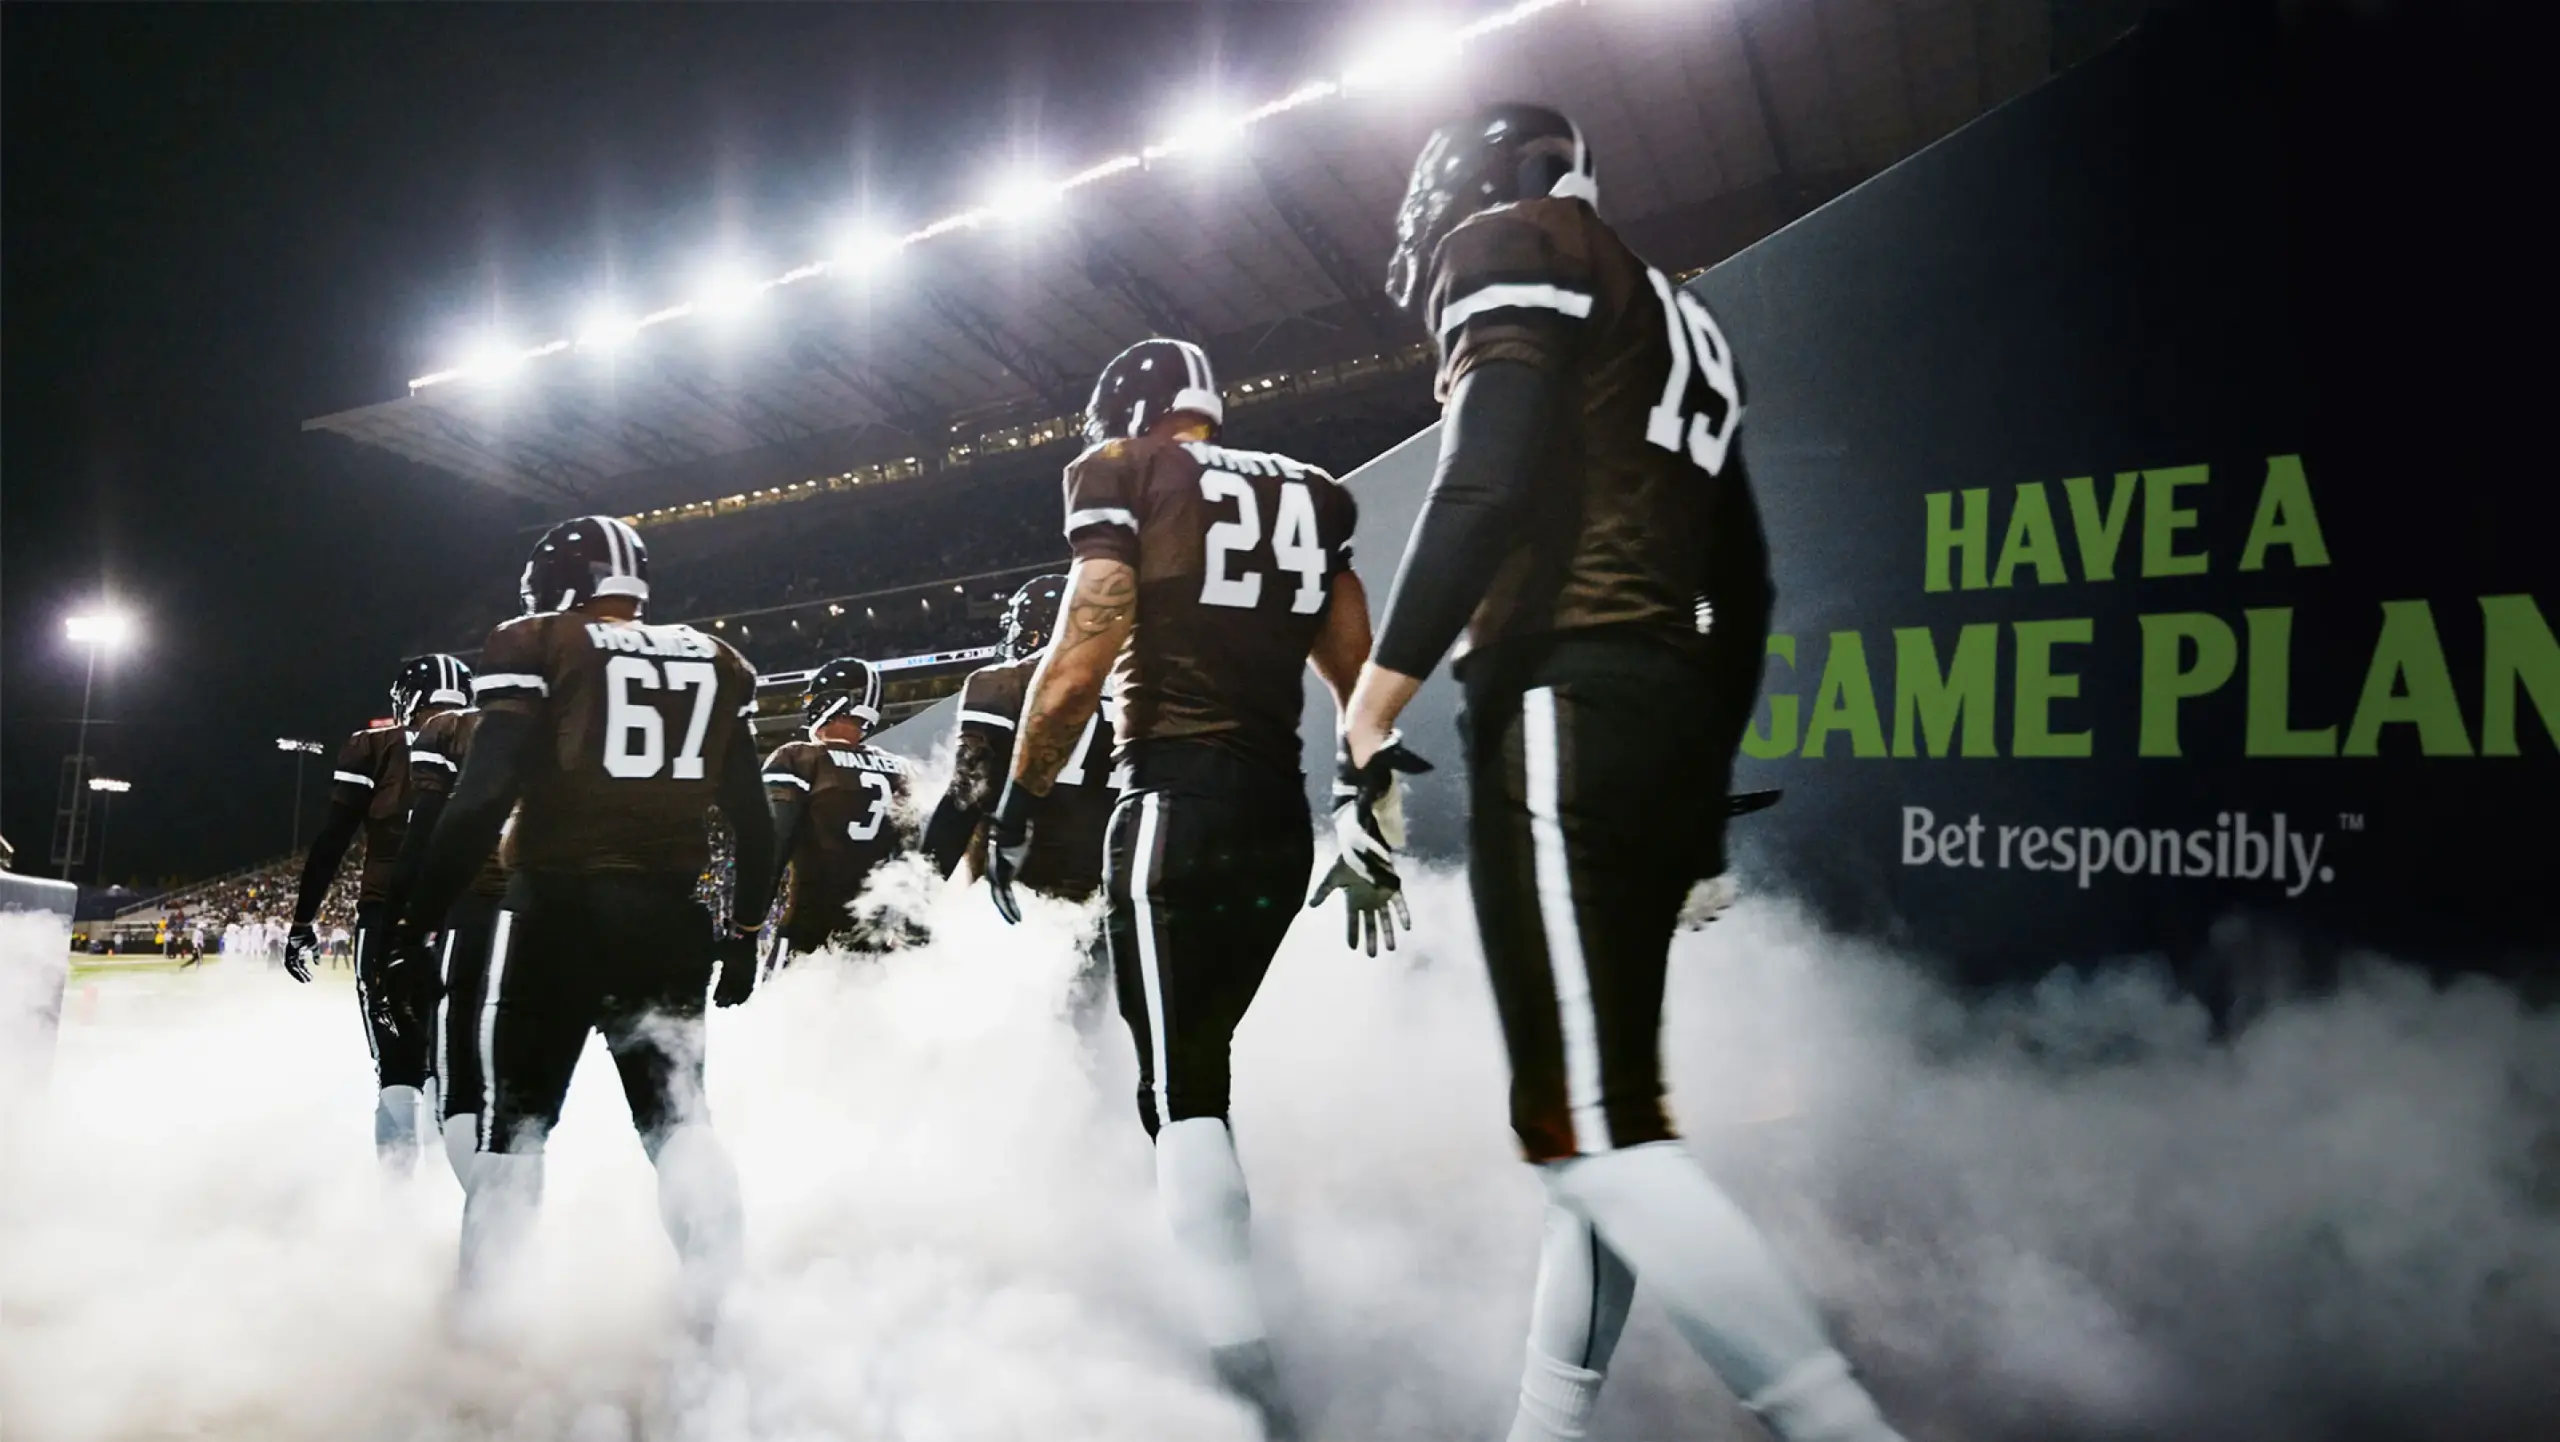 A football team wearing black jerseys with white pants walks through smoke onto the field. The stadium lights are bright in the background. A large sign reads, "Have a game plan. Bet responsibly." The players' jersey numbers visible are 67, 24, and 19.